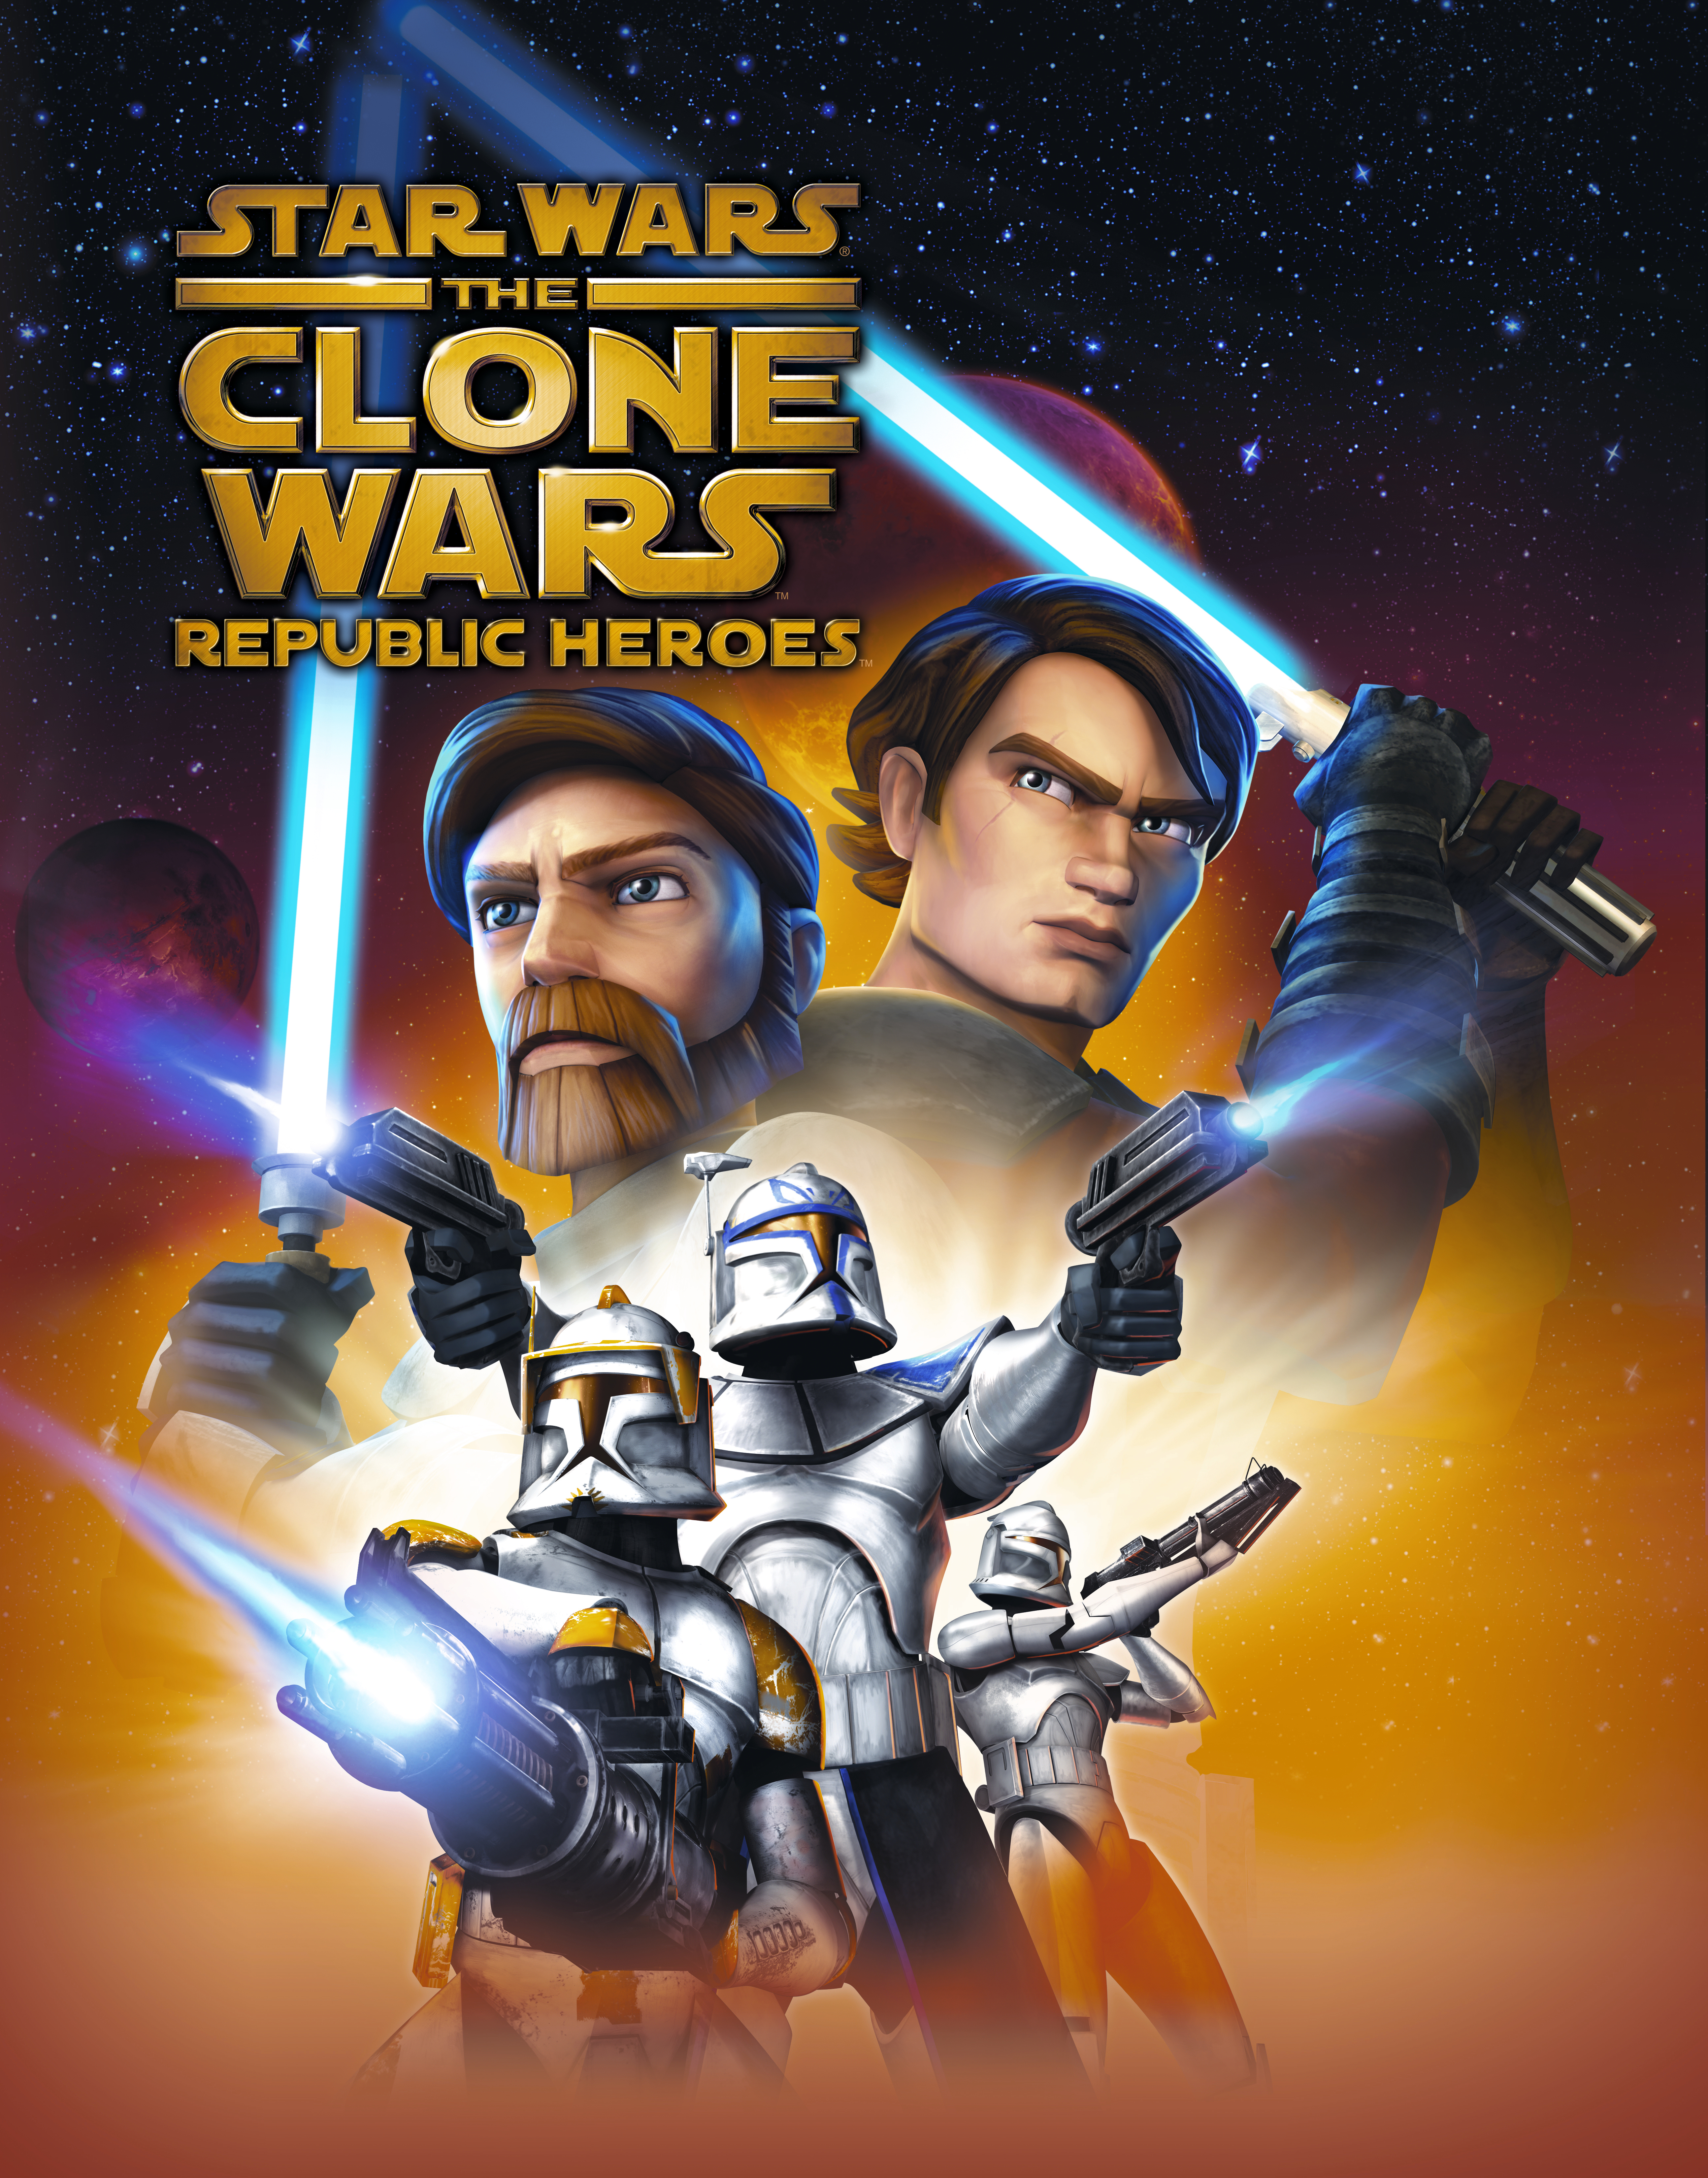 Star Wars: The Clone Wars – Republic Heroes Pics, Video Game Collection